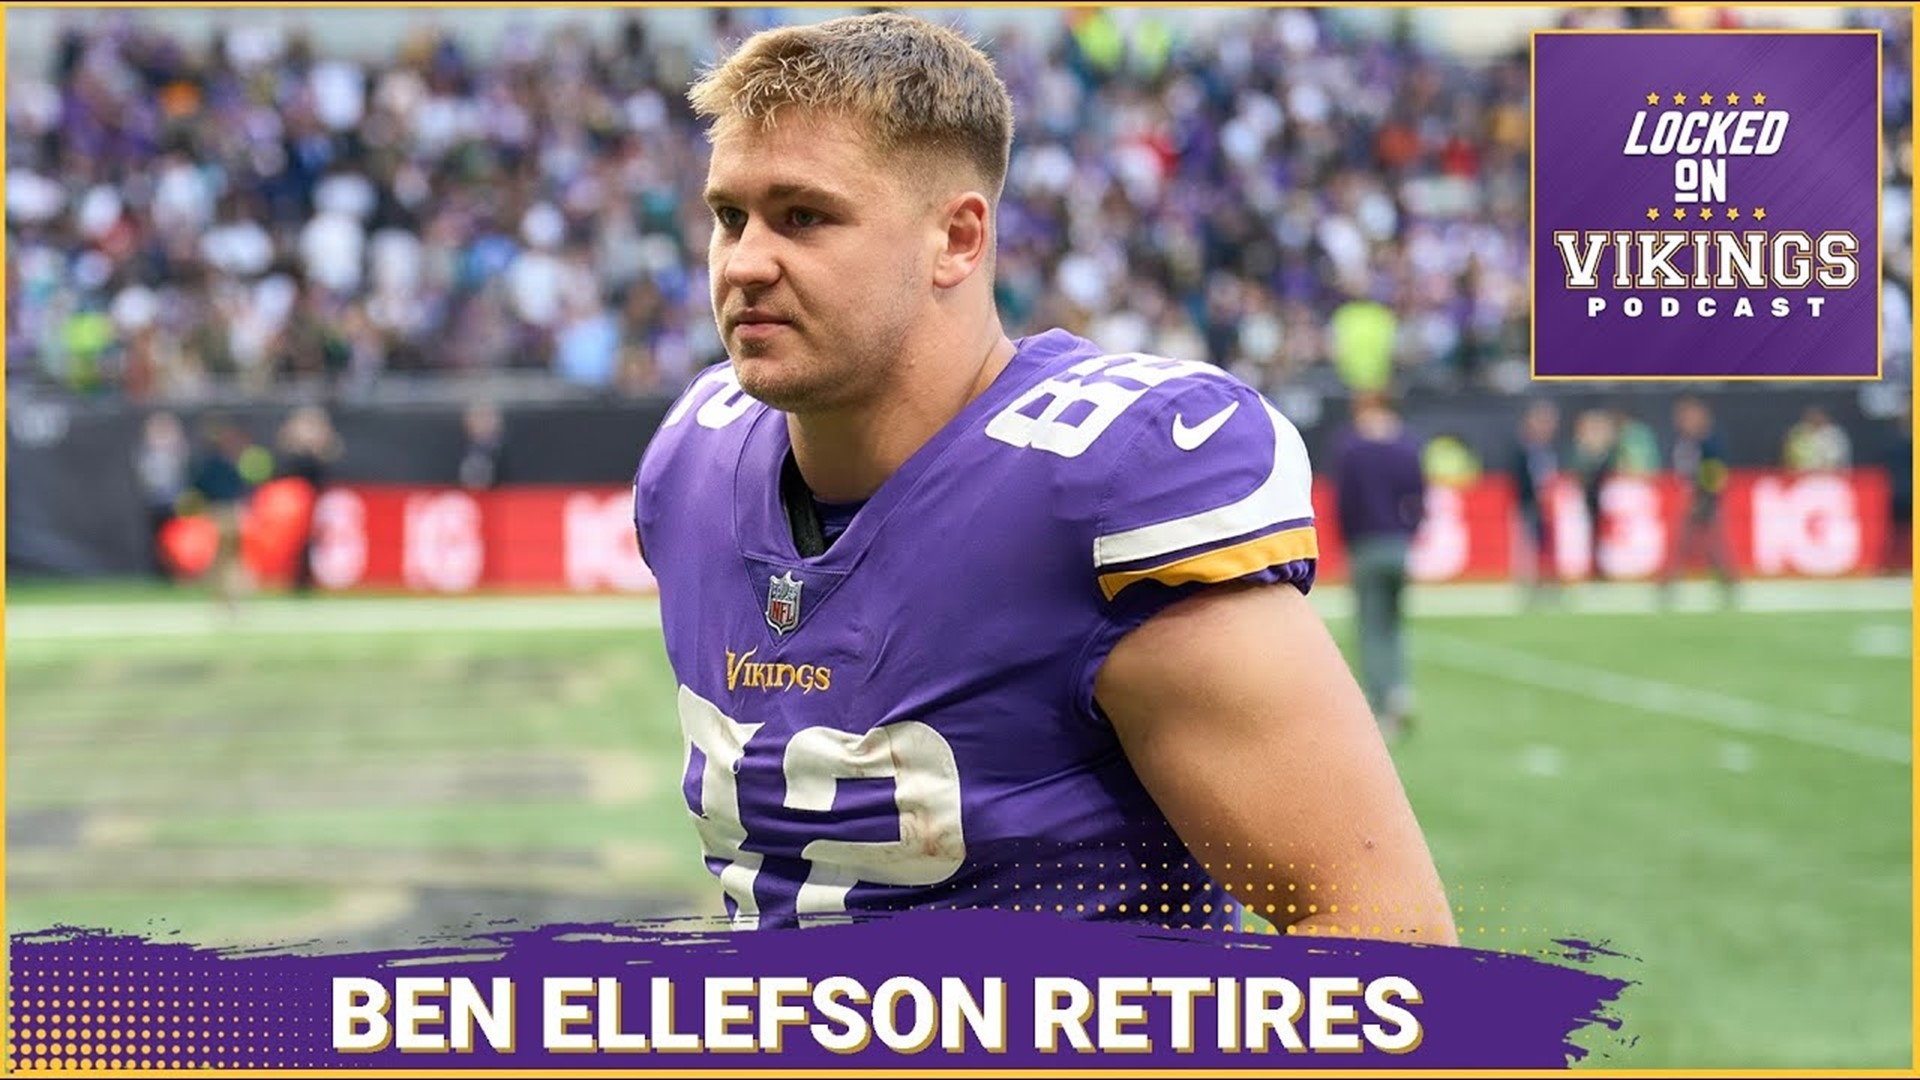 Minnesota Vikings TE Ben Ellefson has retired after just three years in the NFL. These kinds of retirements are getting more and more common.